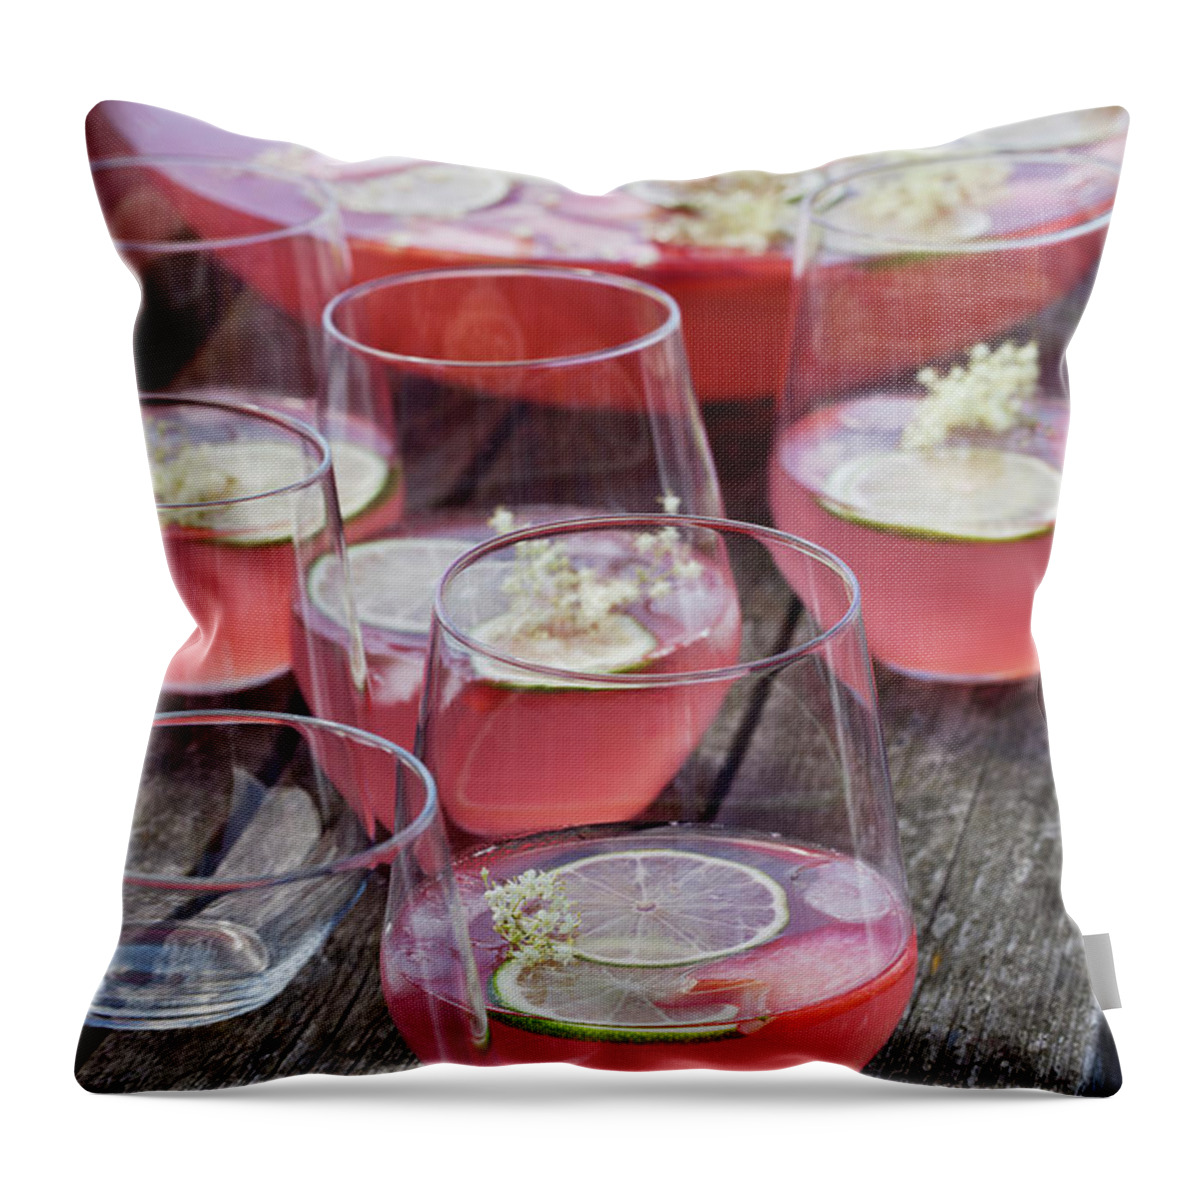 Bohuslan Throw Pillow featuring the photograph Fruit Punch In Glasses by Johner Images